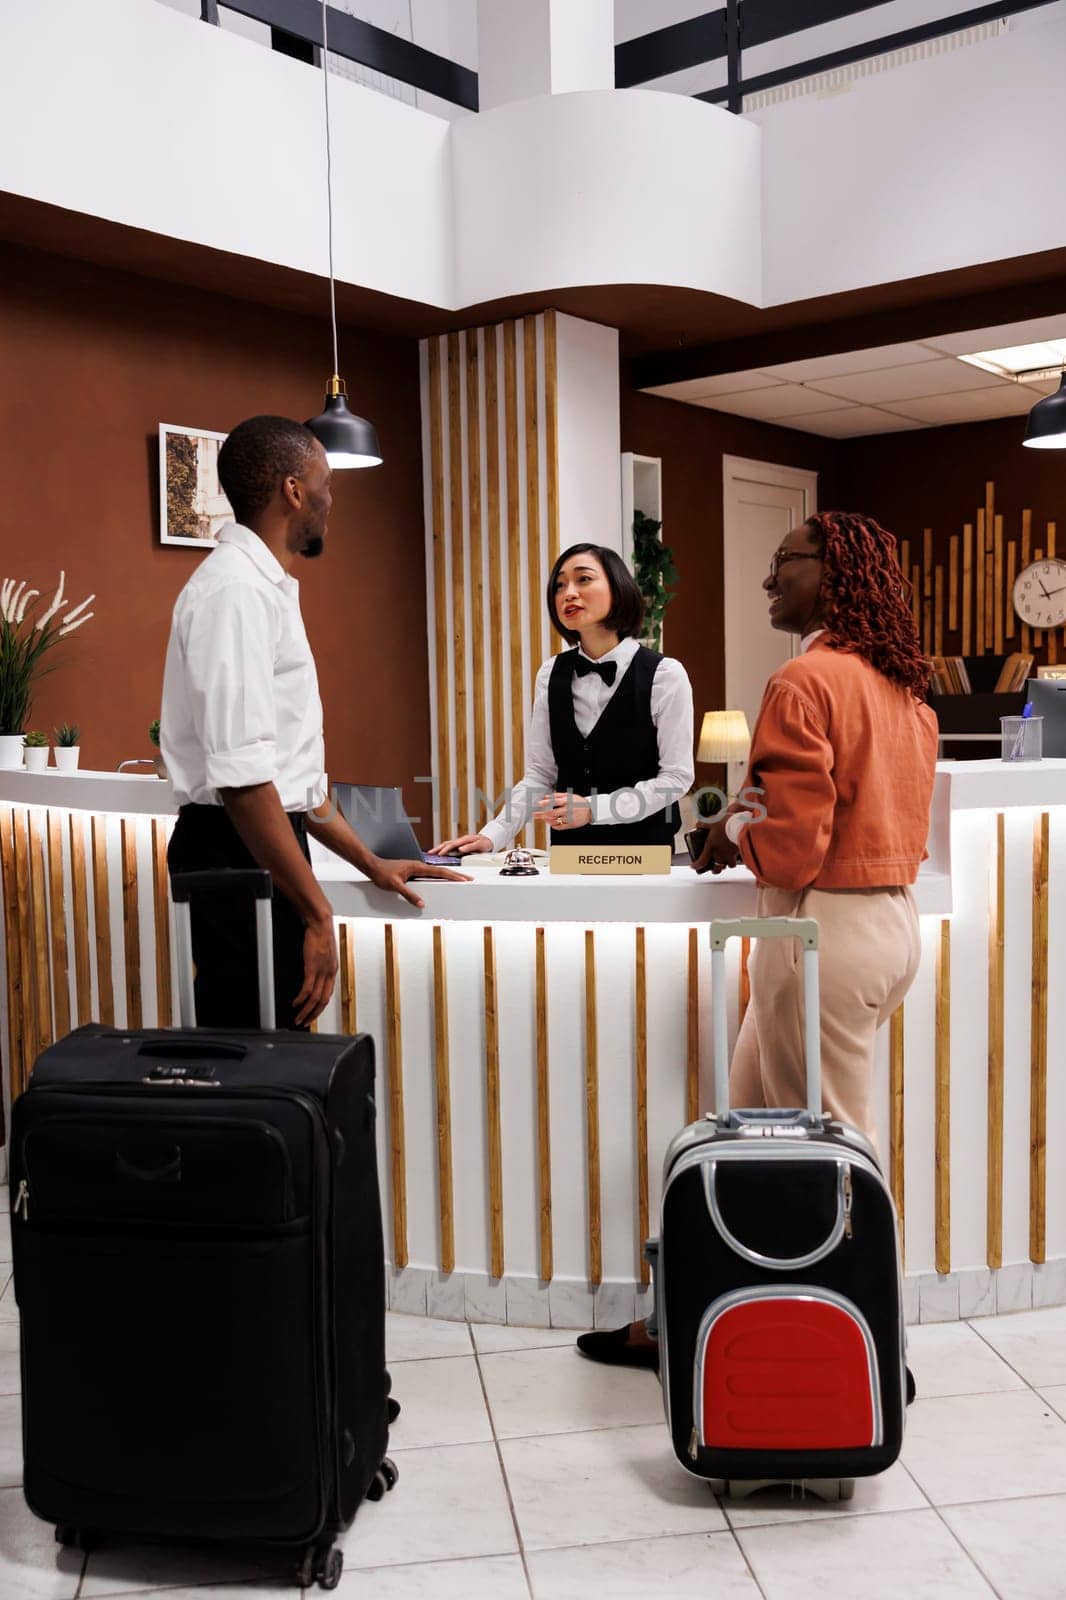 Asian woman welcoming couple at hotel, reviewing guests information before doing check in process to show room. Receptionist registering people arriving at resort, front desk.